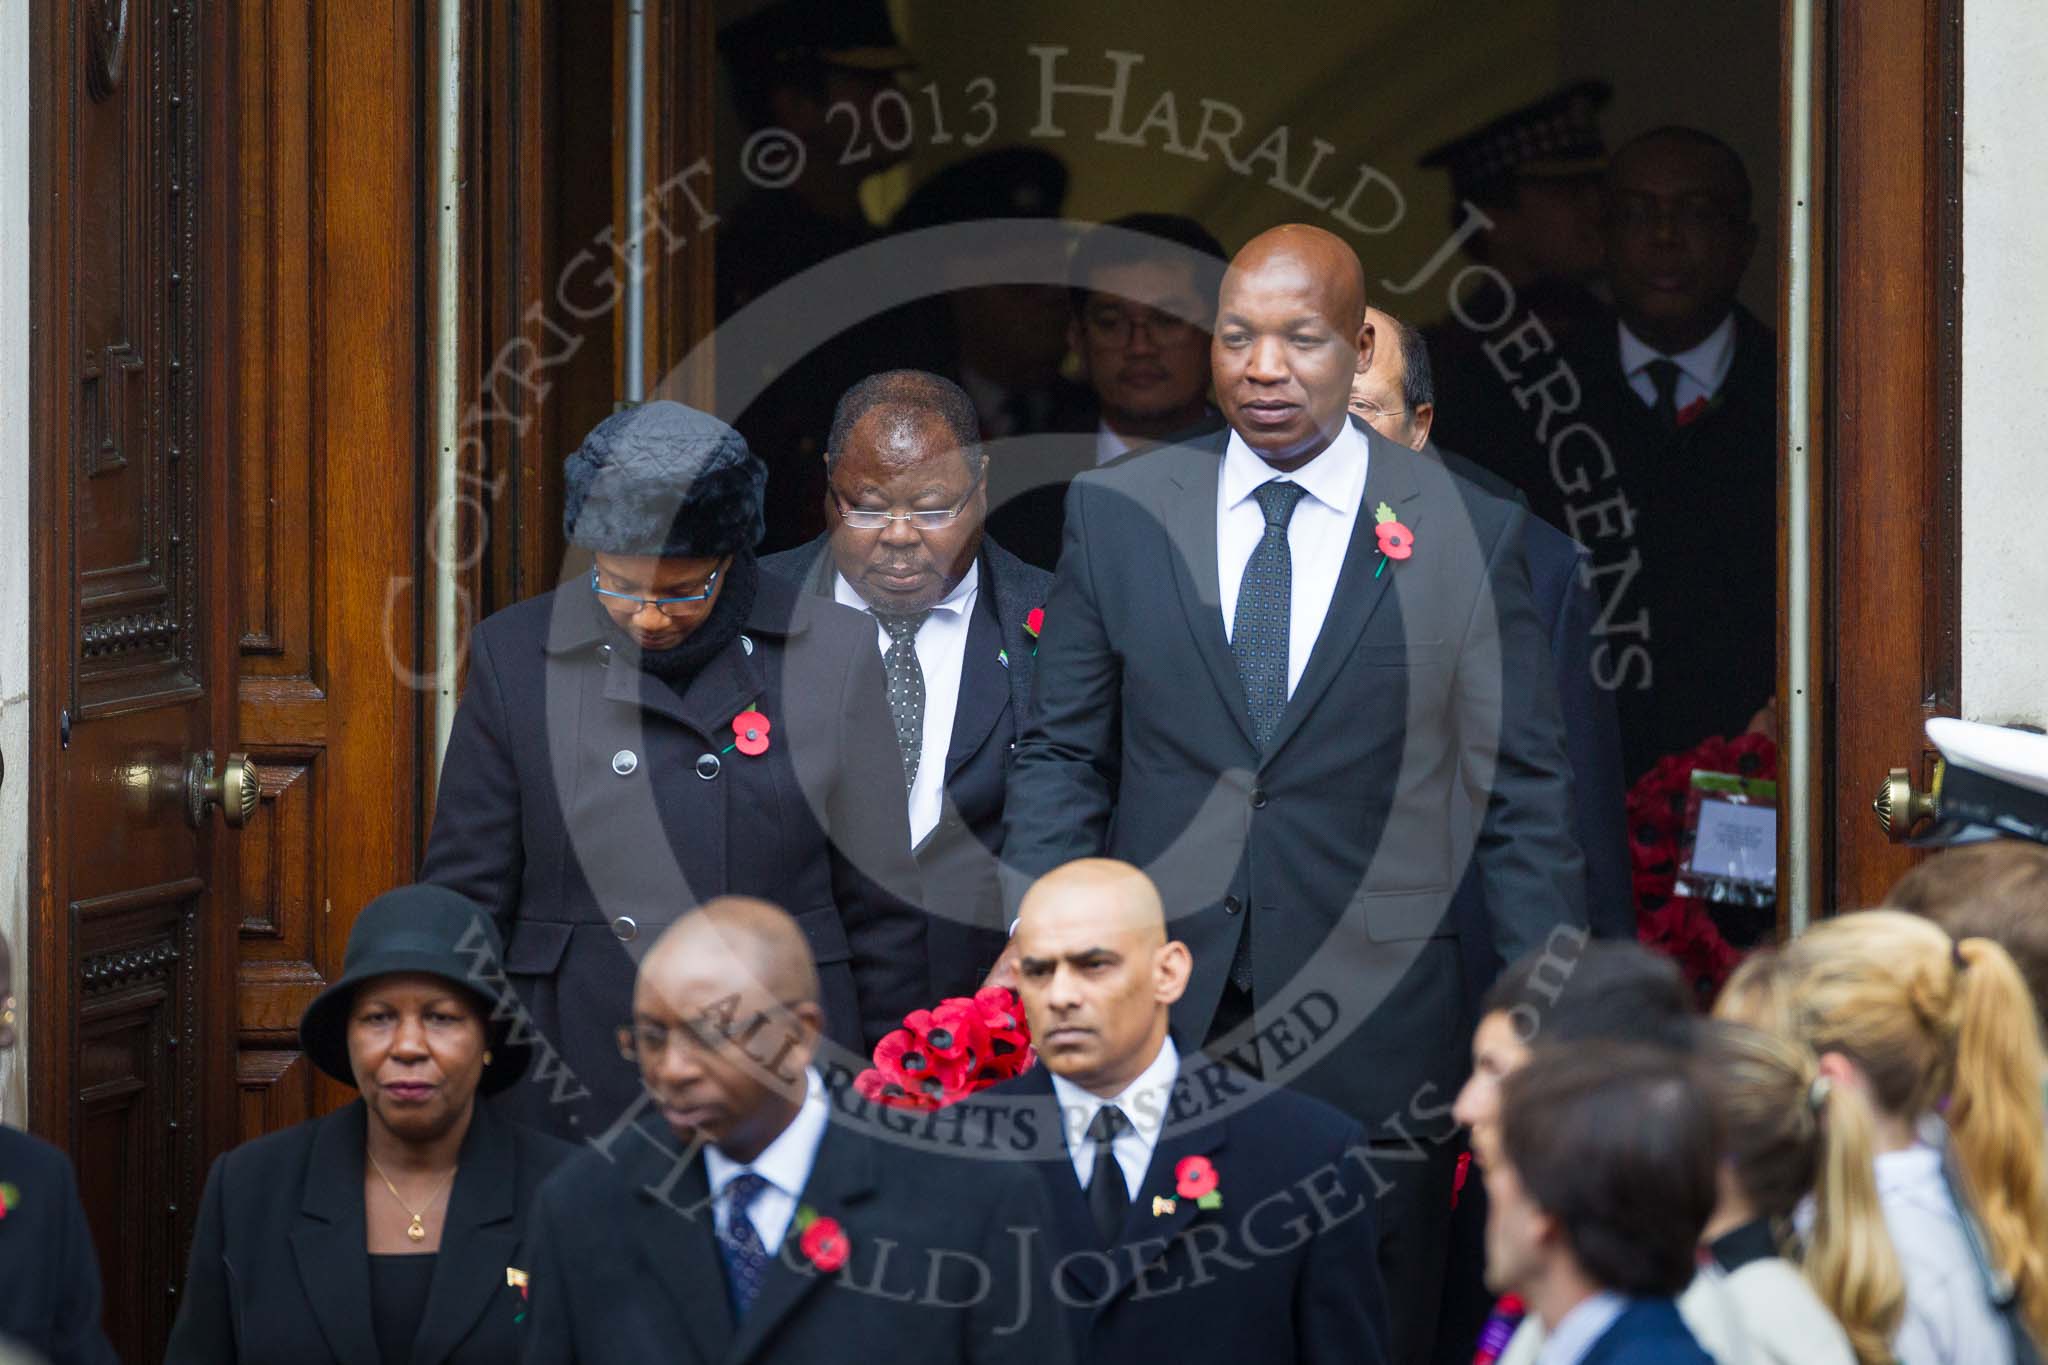 Remembrance Sunday at the Cenotaph 2015: The High Commissioners or their representatives leaving the Foreign- and Commonwealth Office. Image #100, 08 November 2015 10:56 Whitehall, London, UK